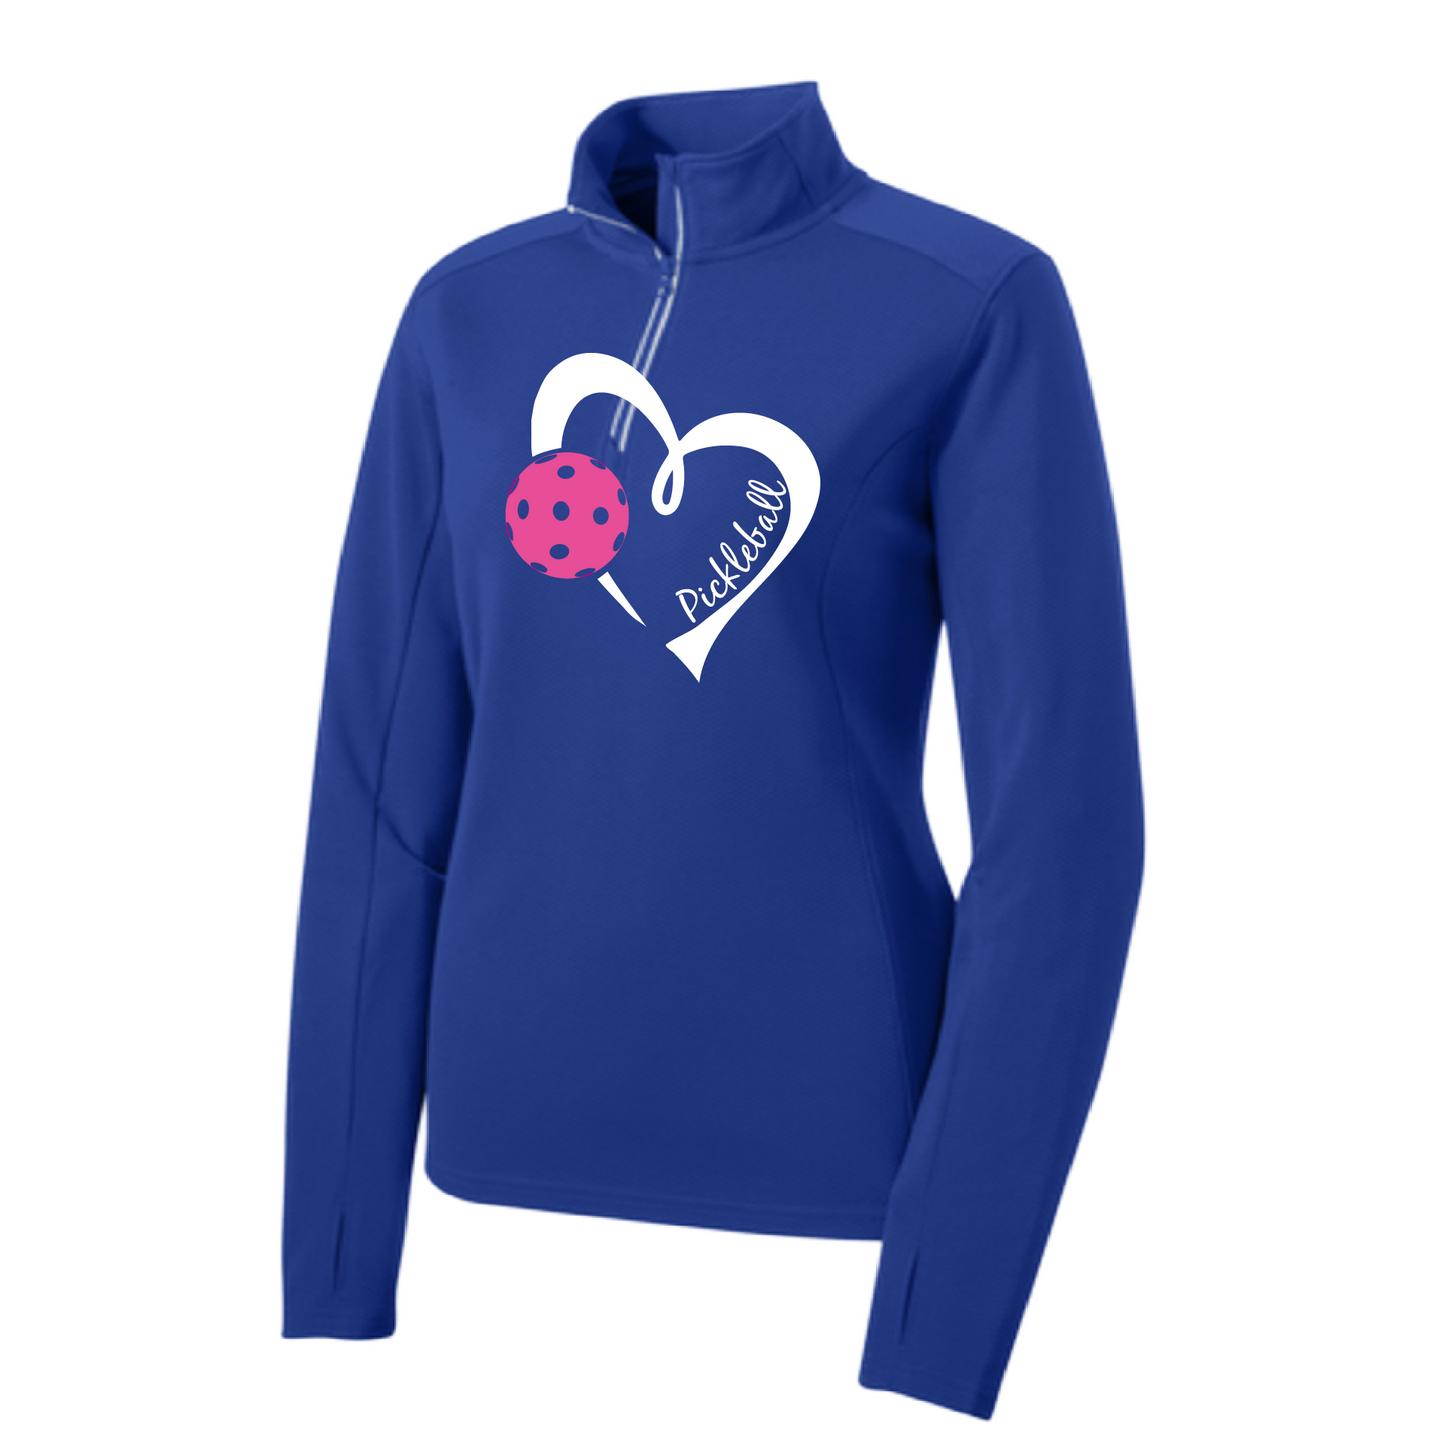 Pickleball Design: Heart with Pickleball  Women's 1/4-Zip Pullover:  Princess seams and drop tail hem.  Turn up the volume in this Women's shirt with its perfect mix of softness and attitude. Material is ultra-comfortable with moisture wicking properties and tri-blend softness. PosiCharge technology locks in color. Highly breathable and lightweight. Versatile enough for wearing year-round.